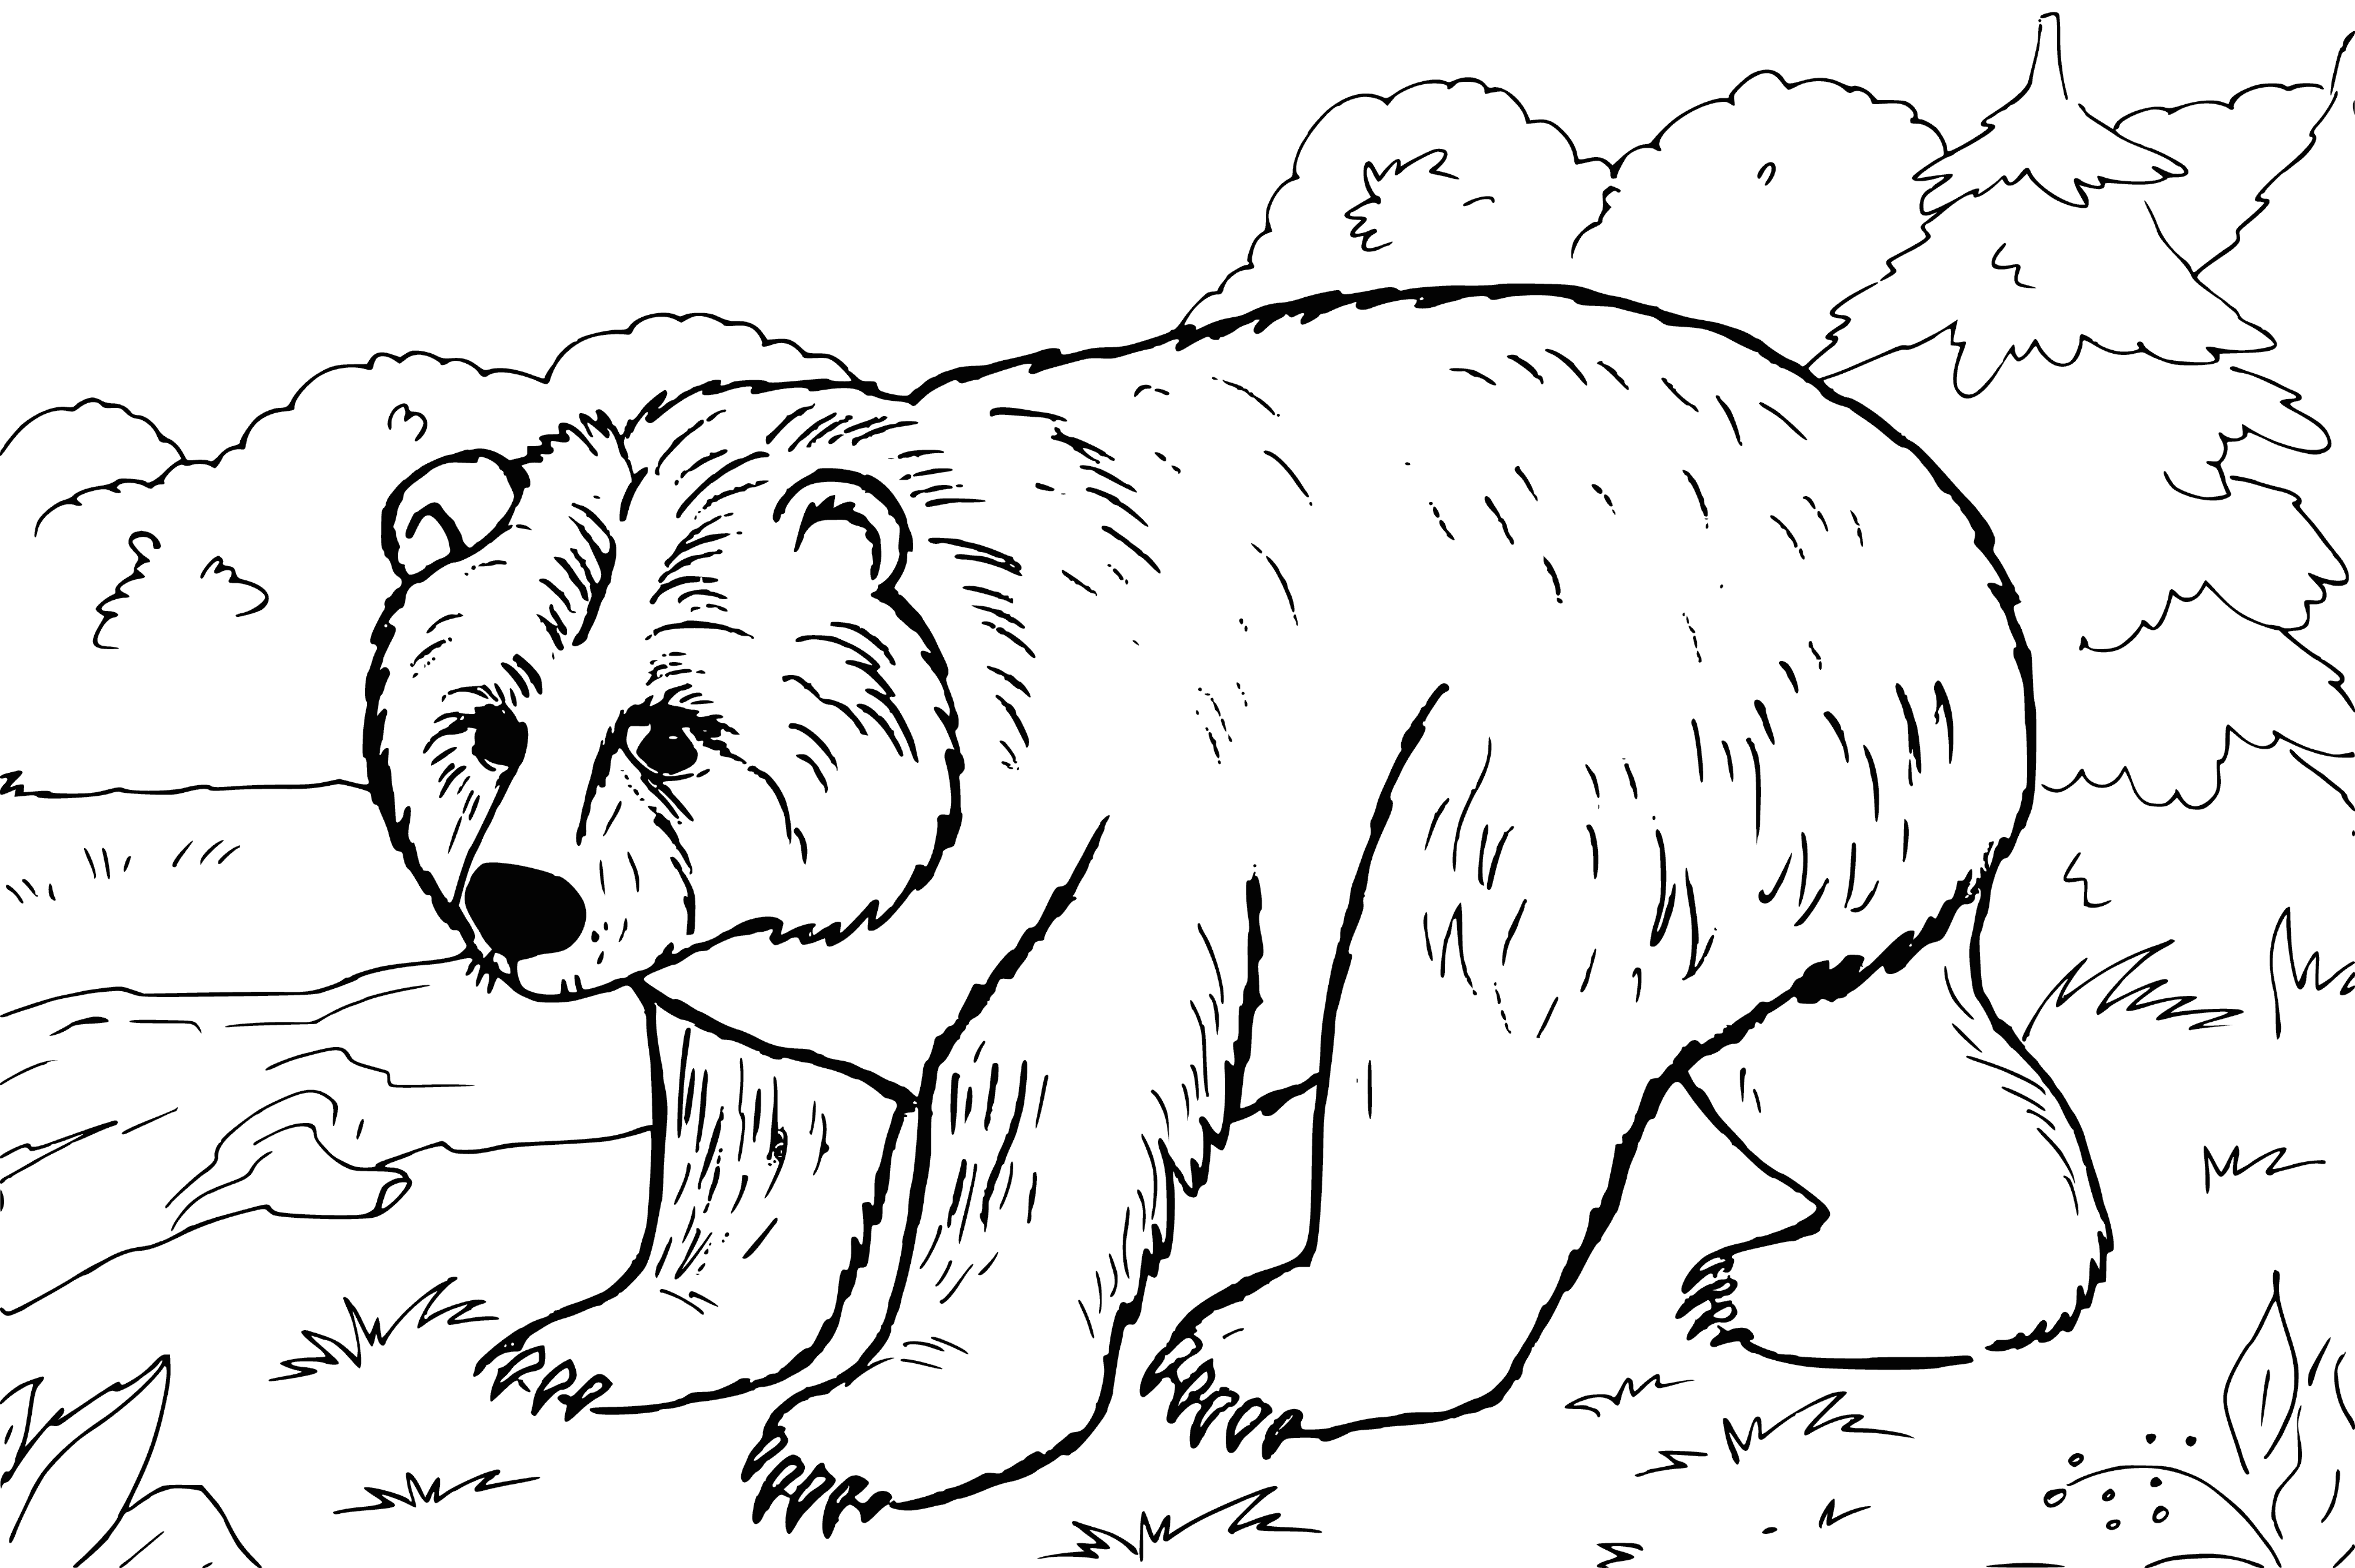 coloring page: Standing strong, a large animal withbrown fur and a long snout stares ahead in the coloring page. It looks strong and determined.